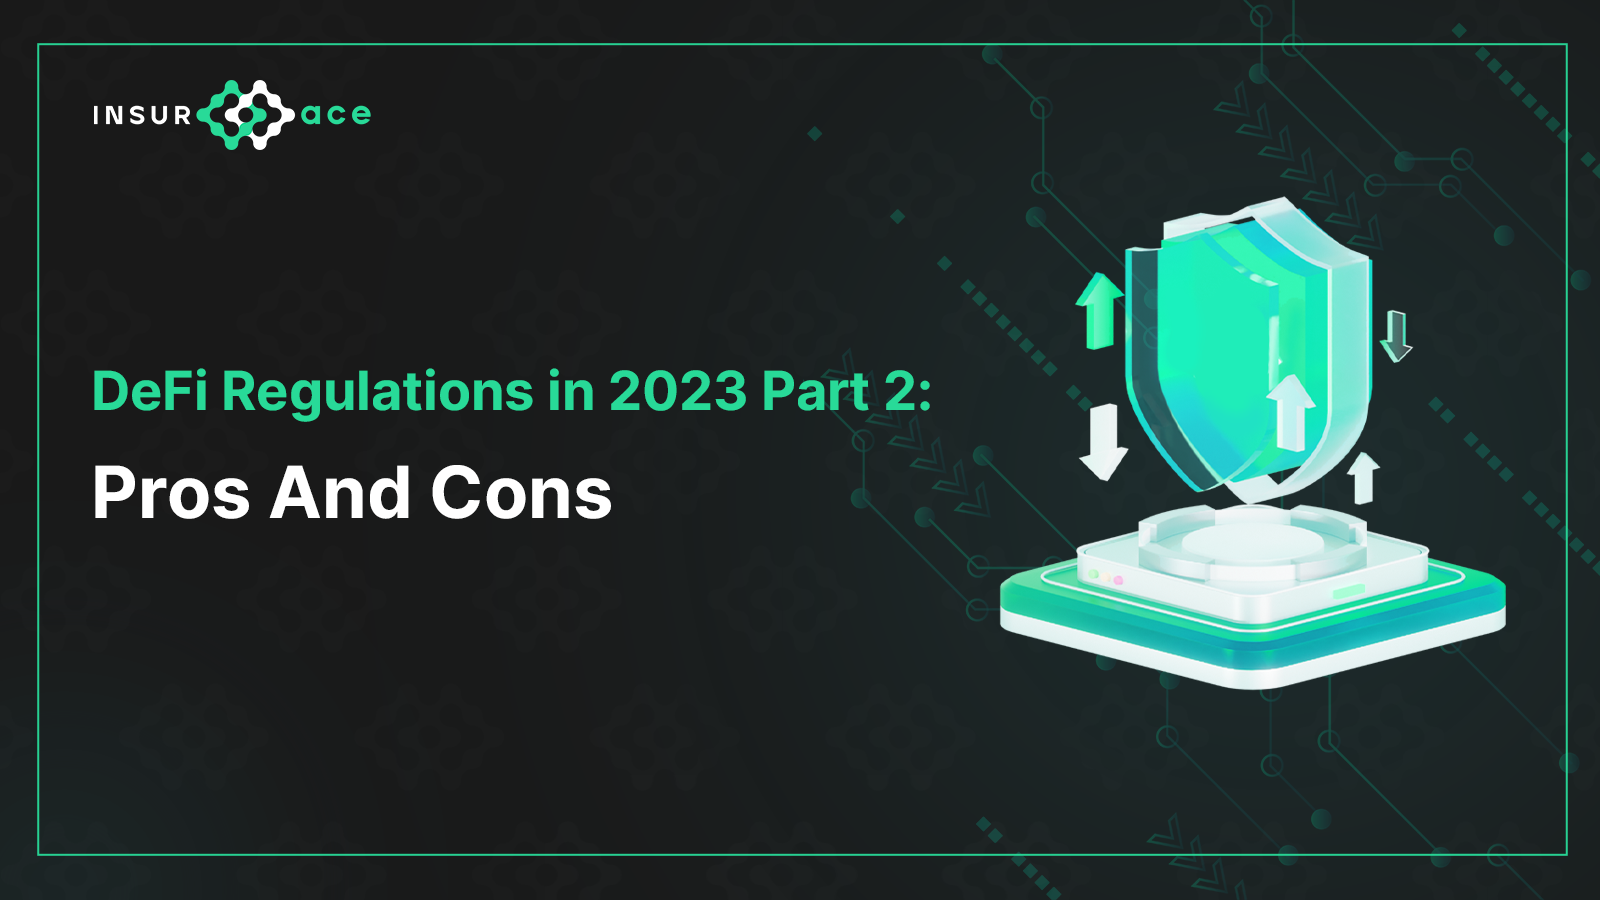 DeFi Regulations Pros and Cons